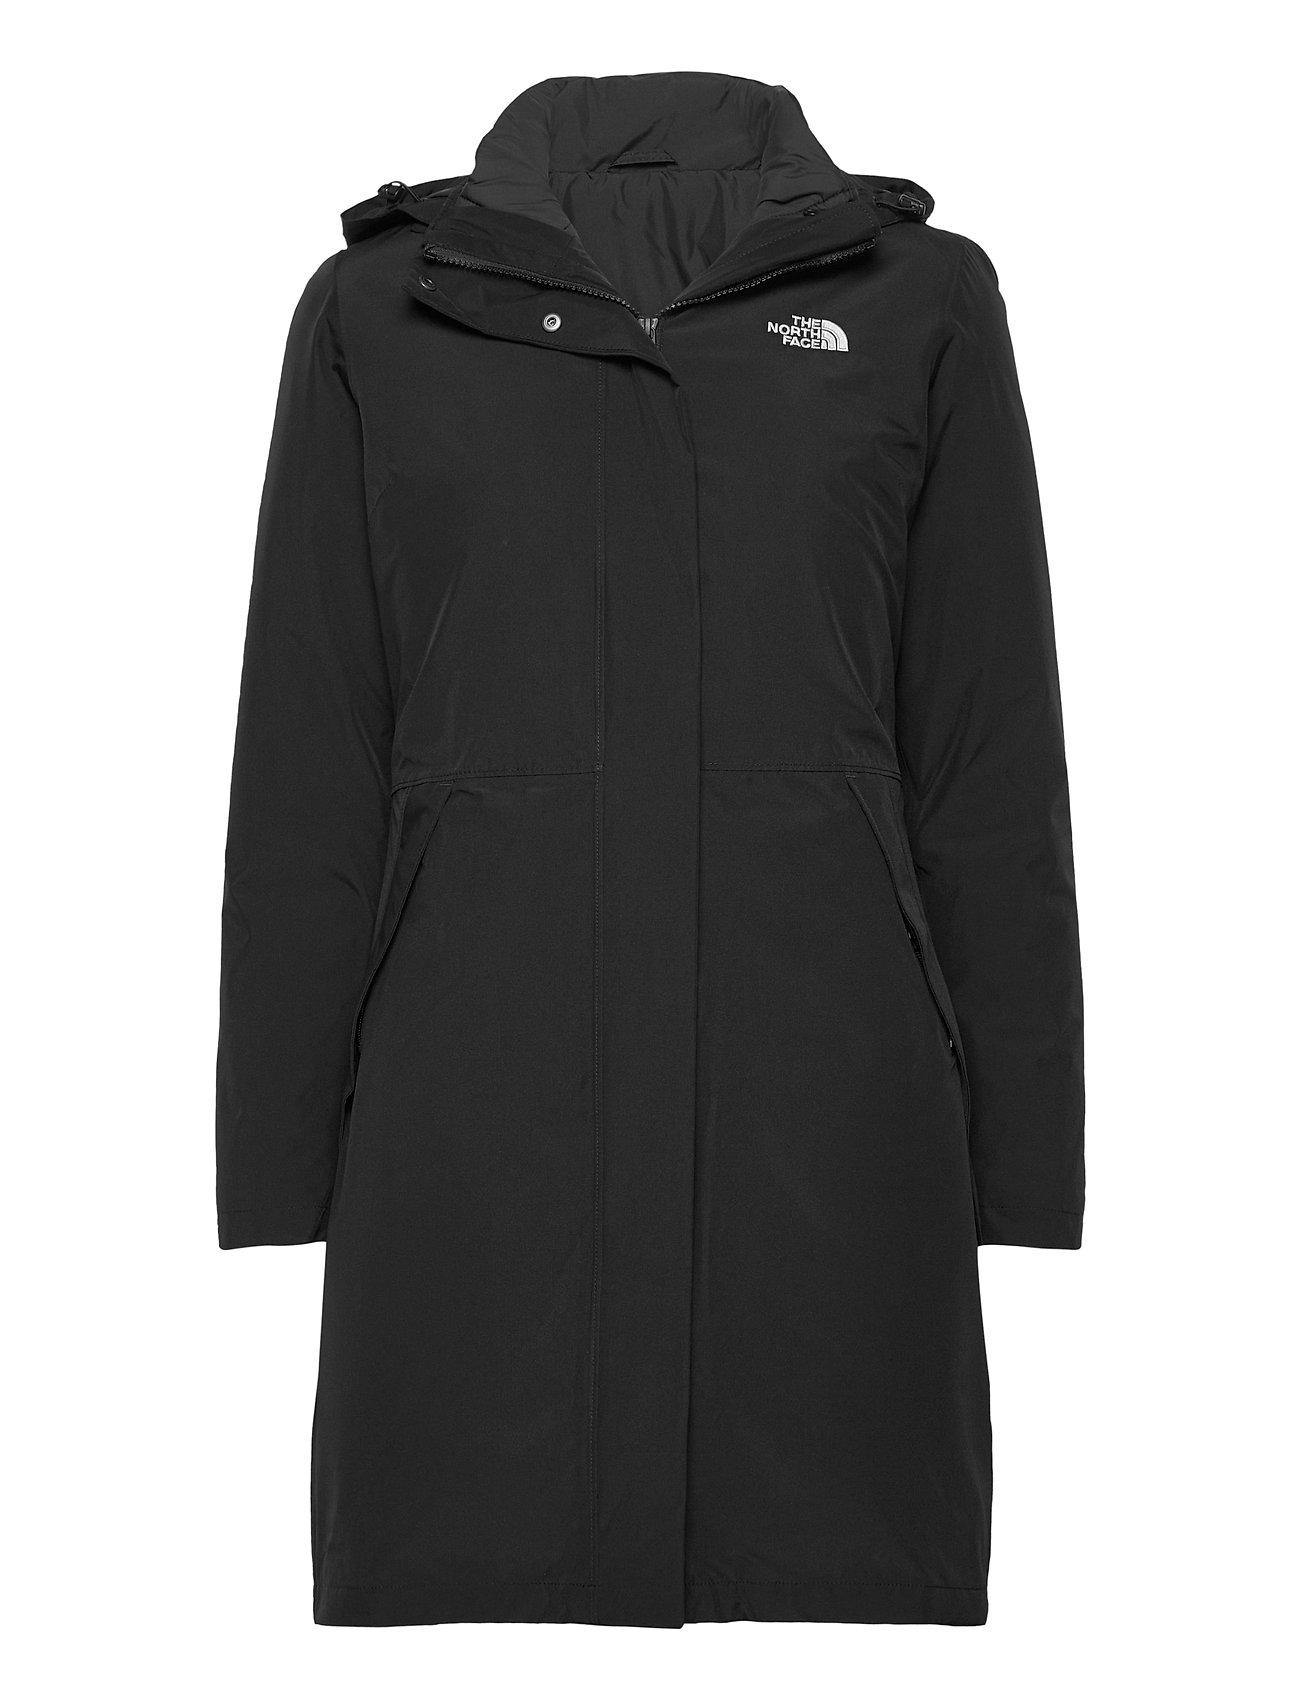 W Suzanne Triclimate Sport Parka Coats Black The North Face